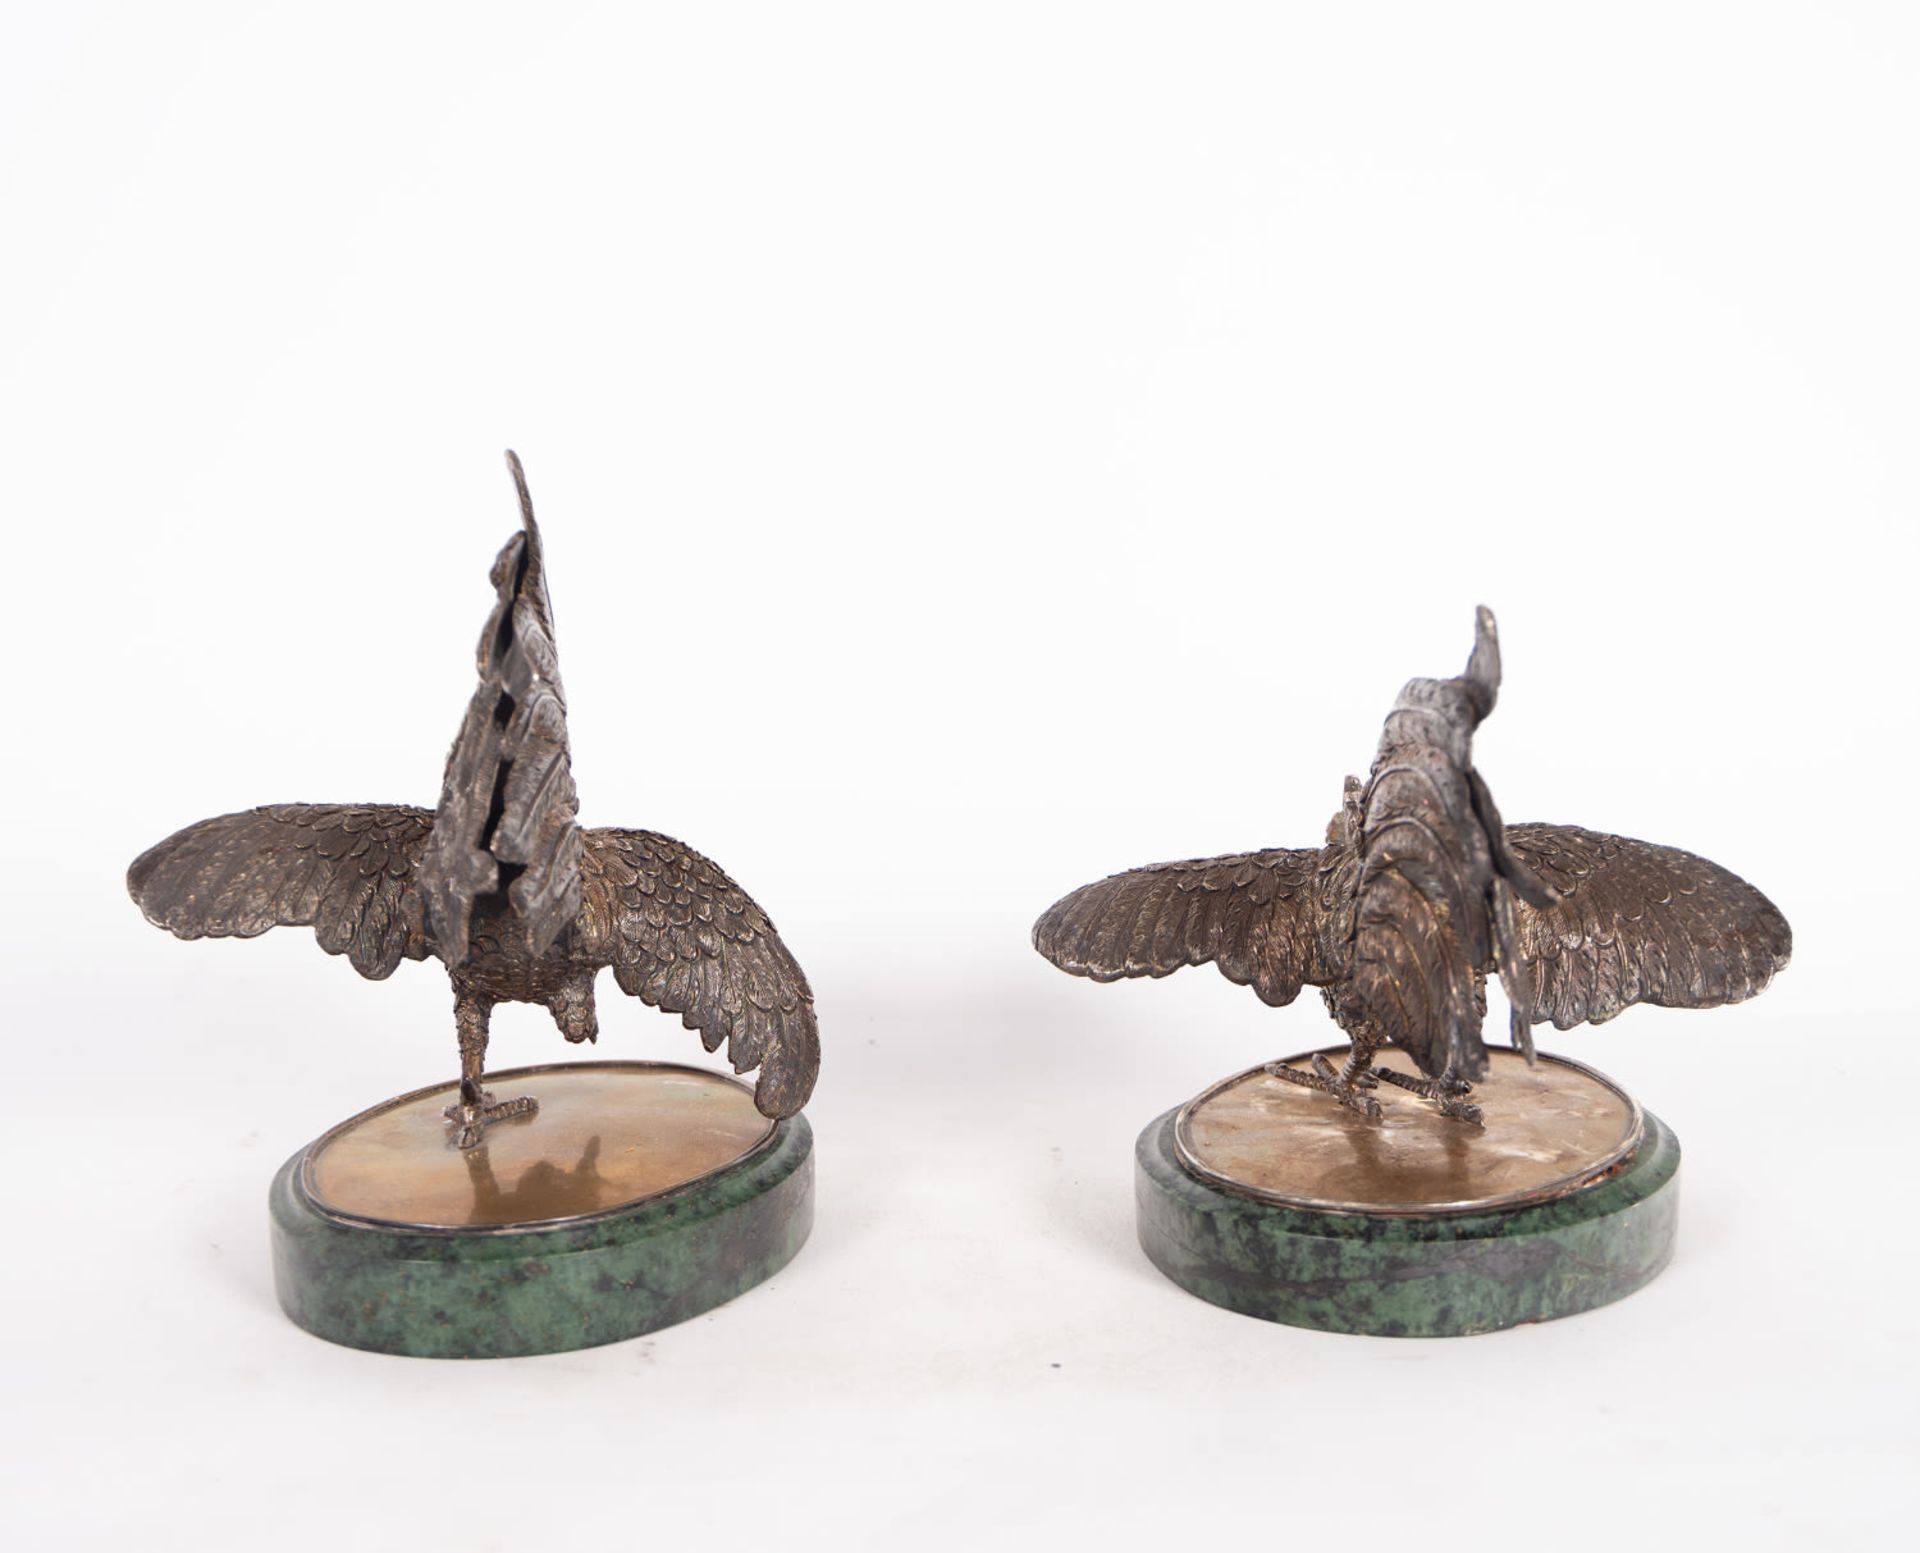 Pair of Roosters in patinated bronze, Portuguese school from the end of the 19th century - Image 5 of 5